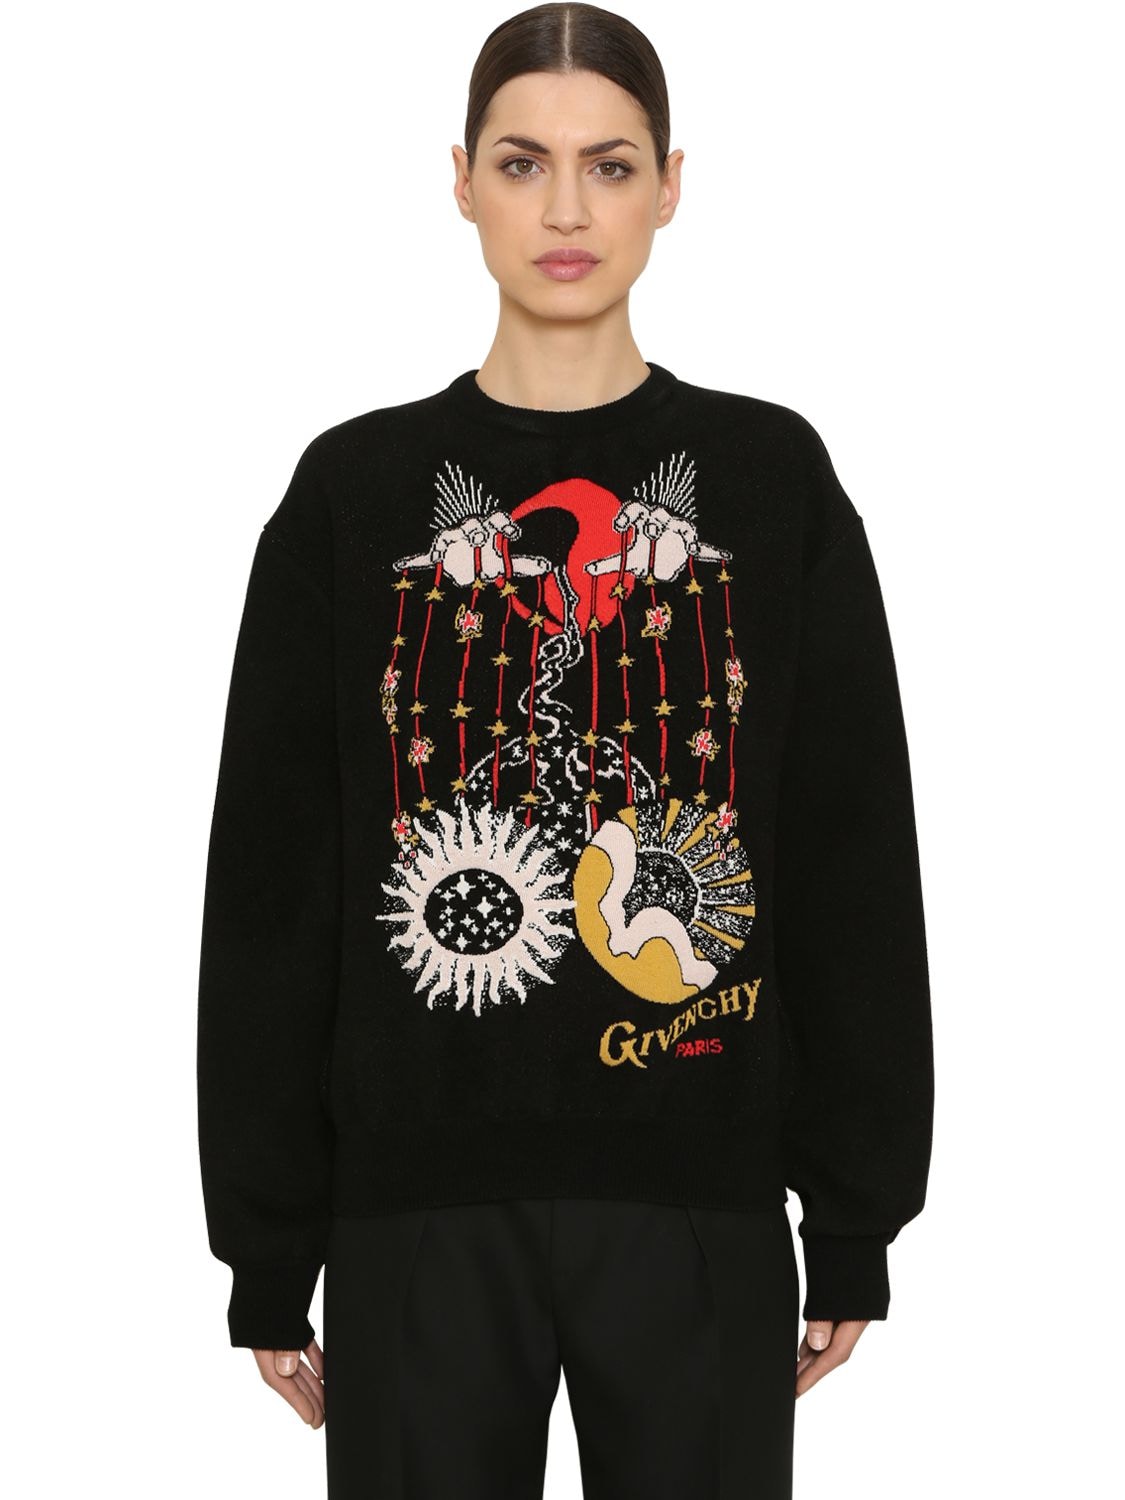 GIVENCHY JACQUARD WOOL BLEND KNIT SWEATER,68ID19016-OTYw0